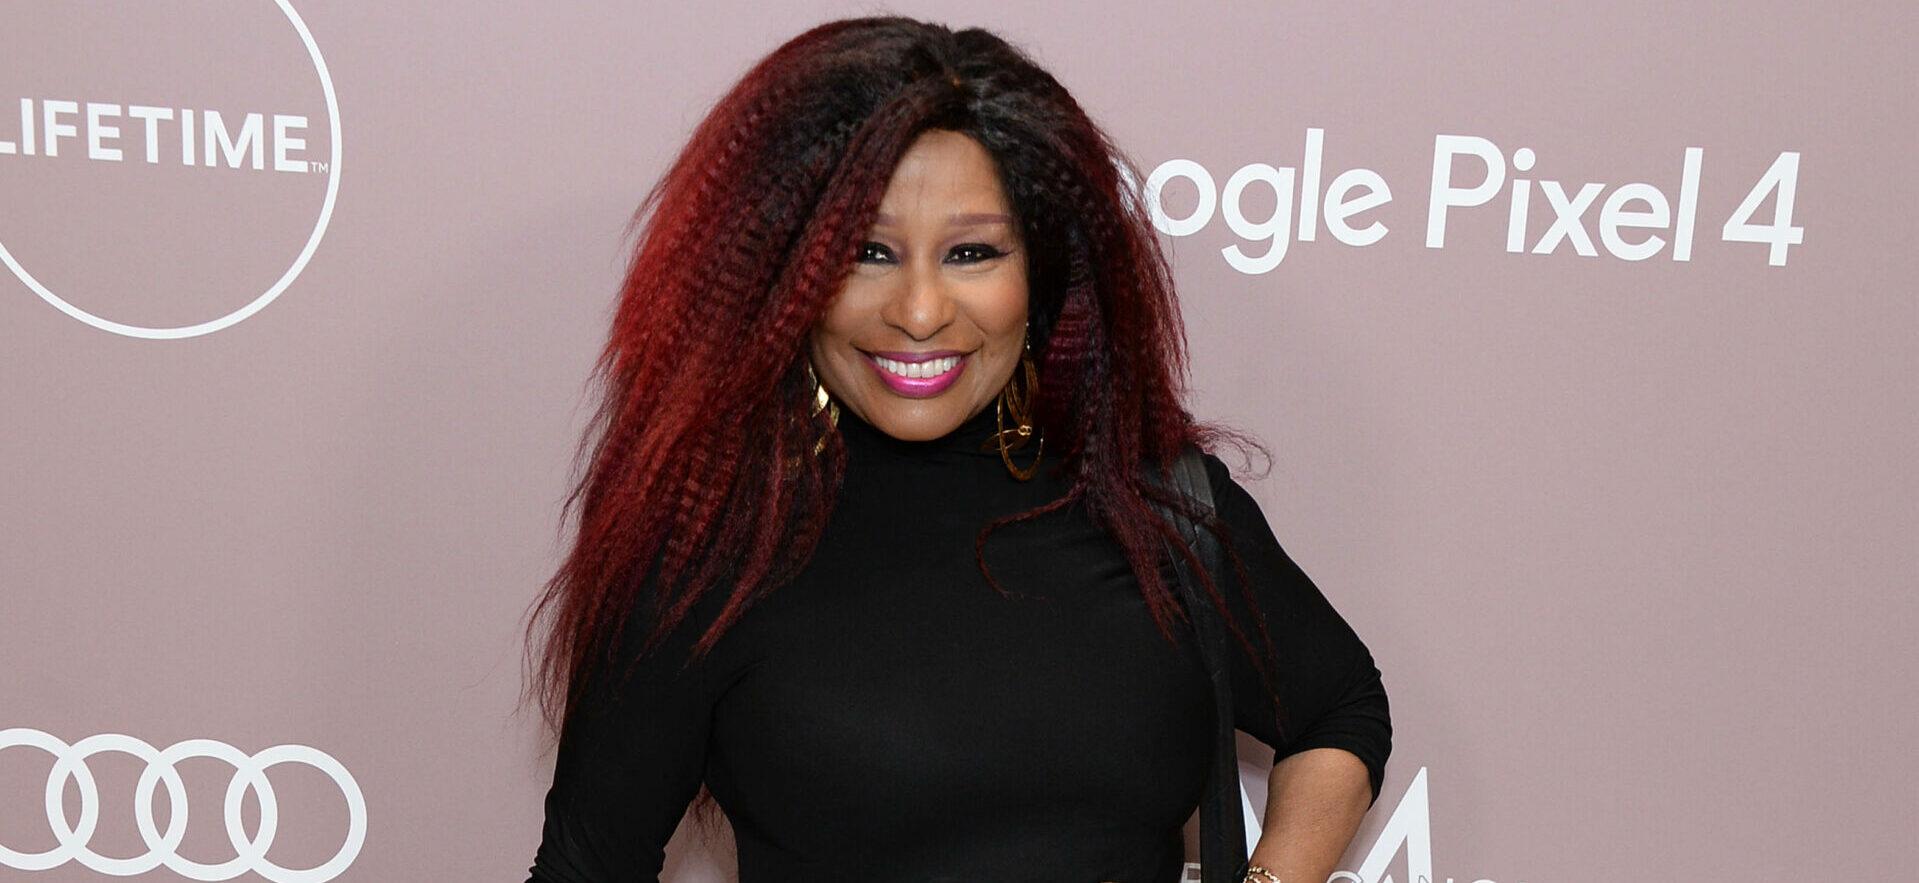 Chaka Khan Expresses Regret After Slamming Artists On Rolling Stone’s ‘Greatest Singers’ List